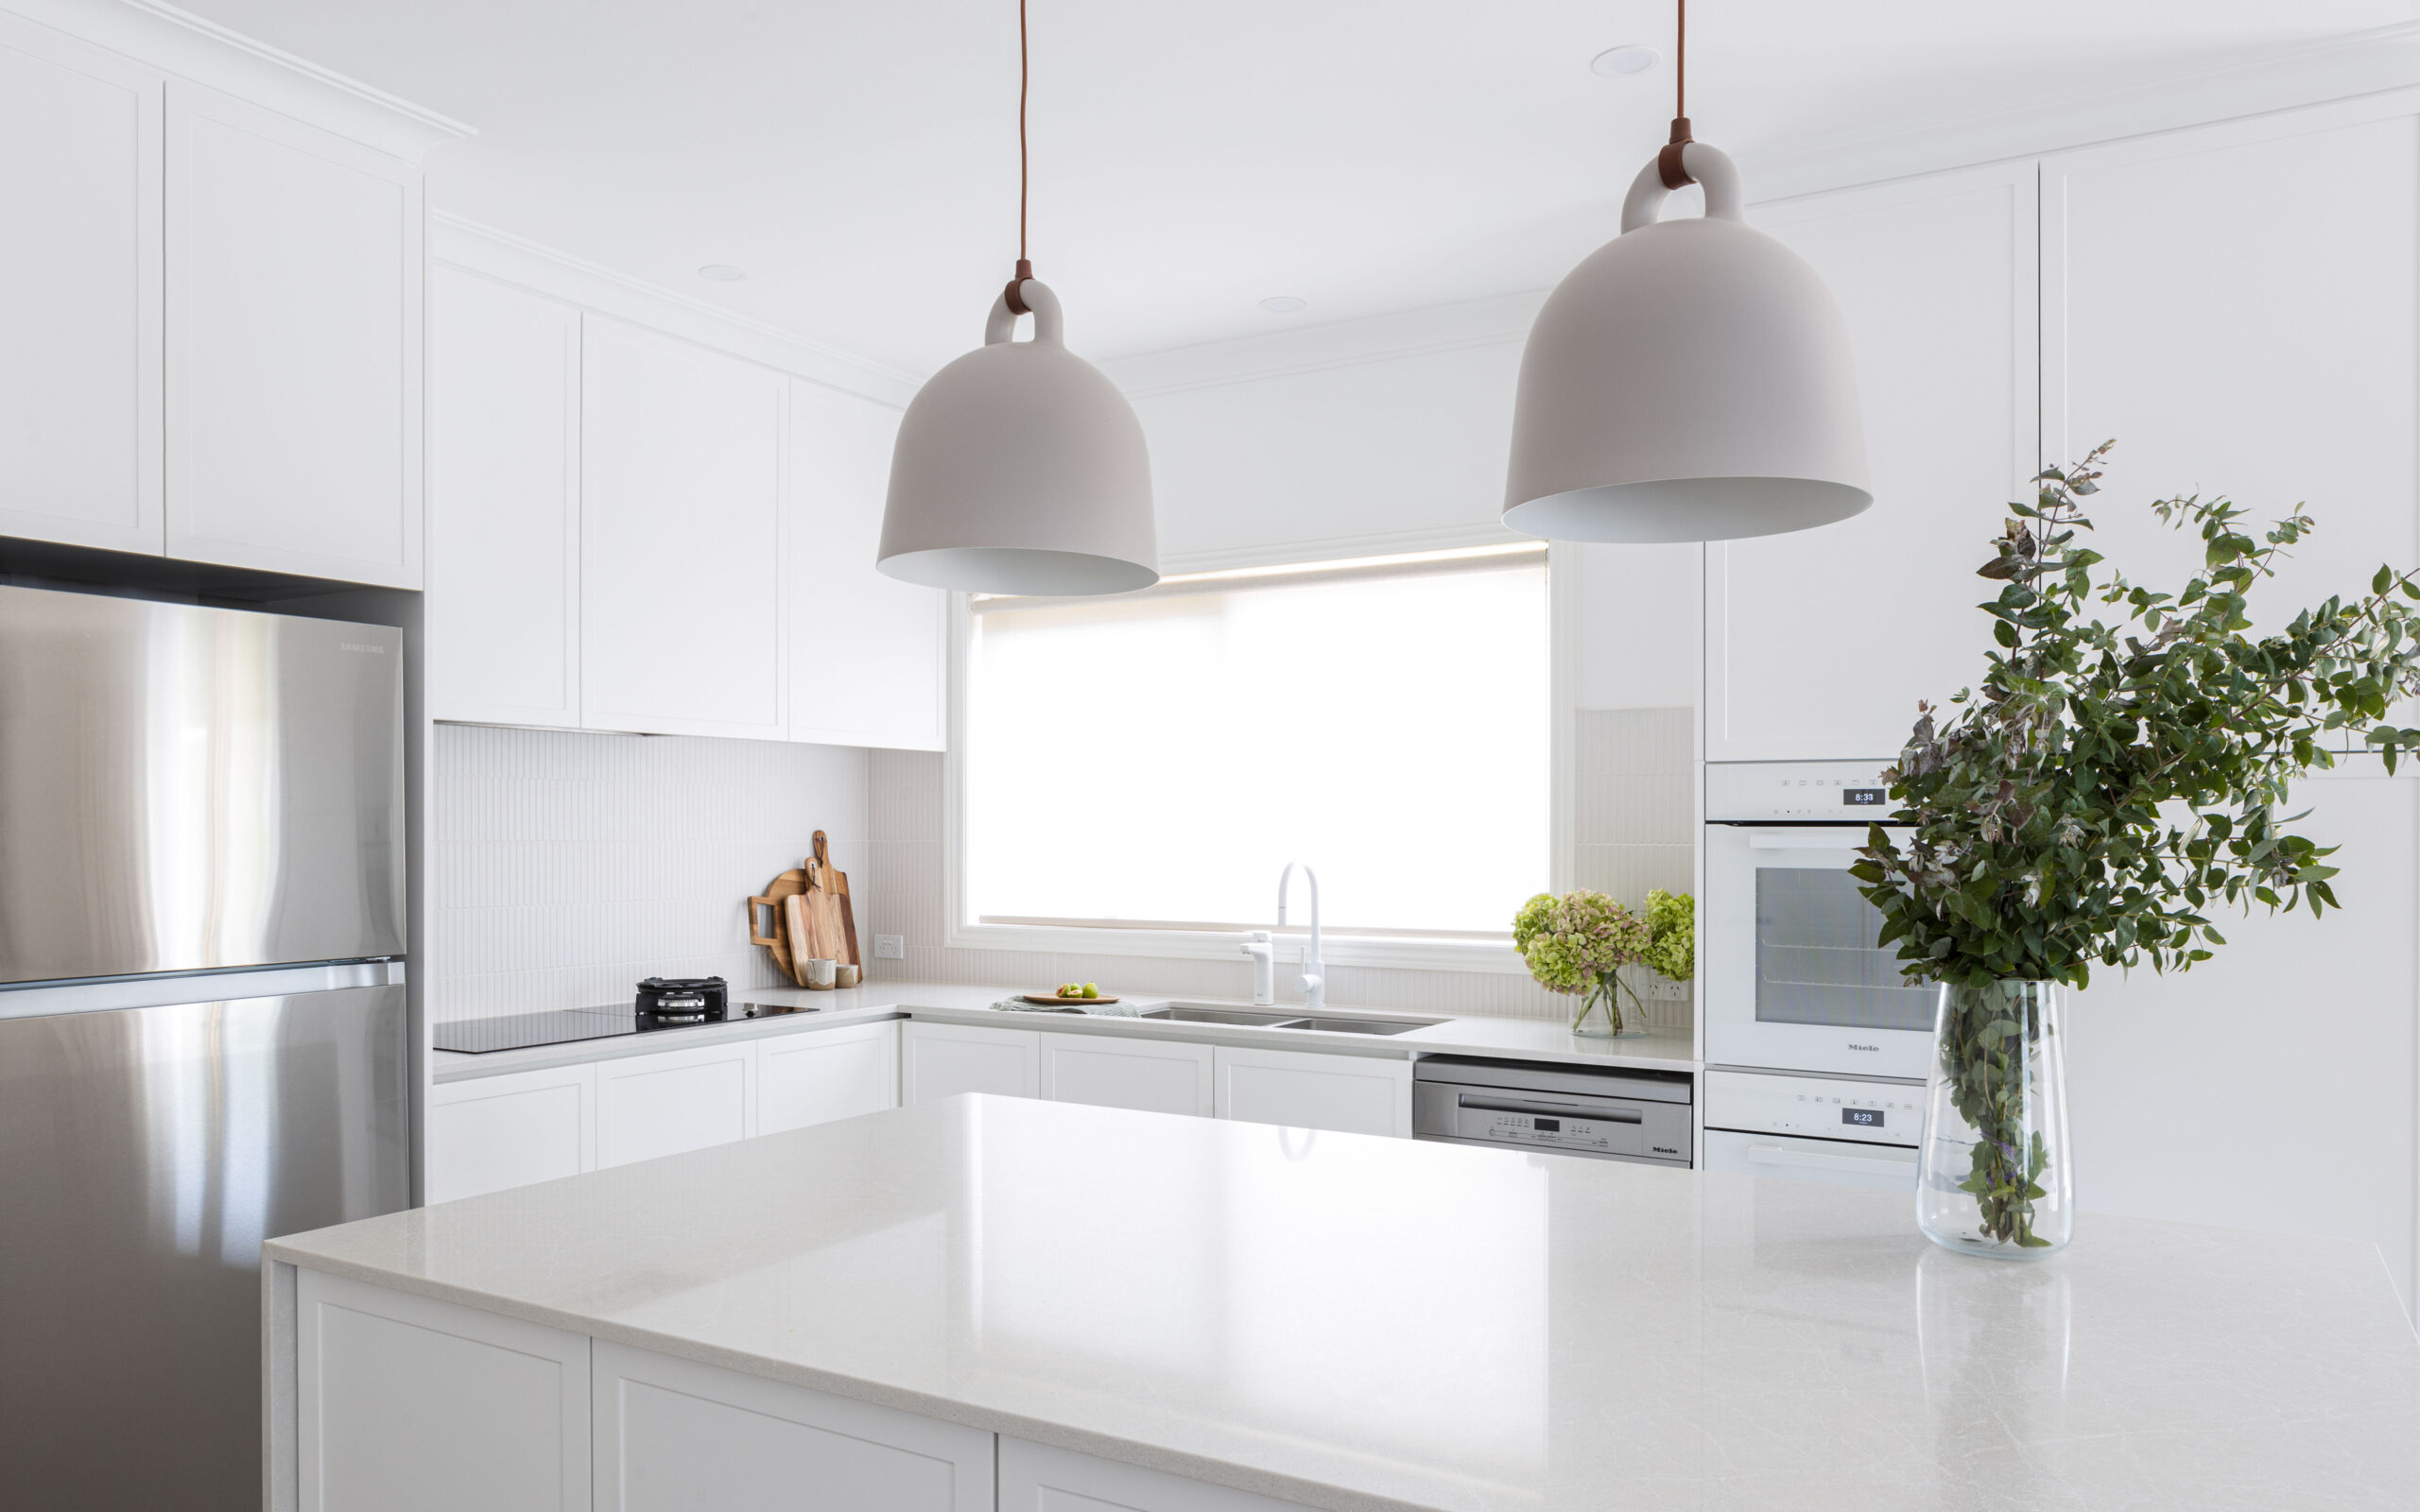 Bell pendant lights hanging over island bench in our Balwyn kitchen renovation